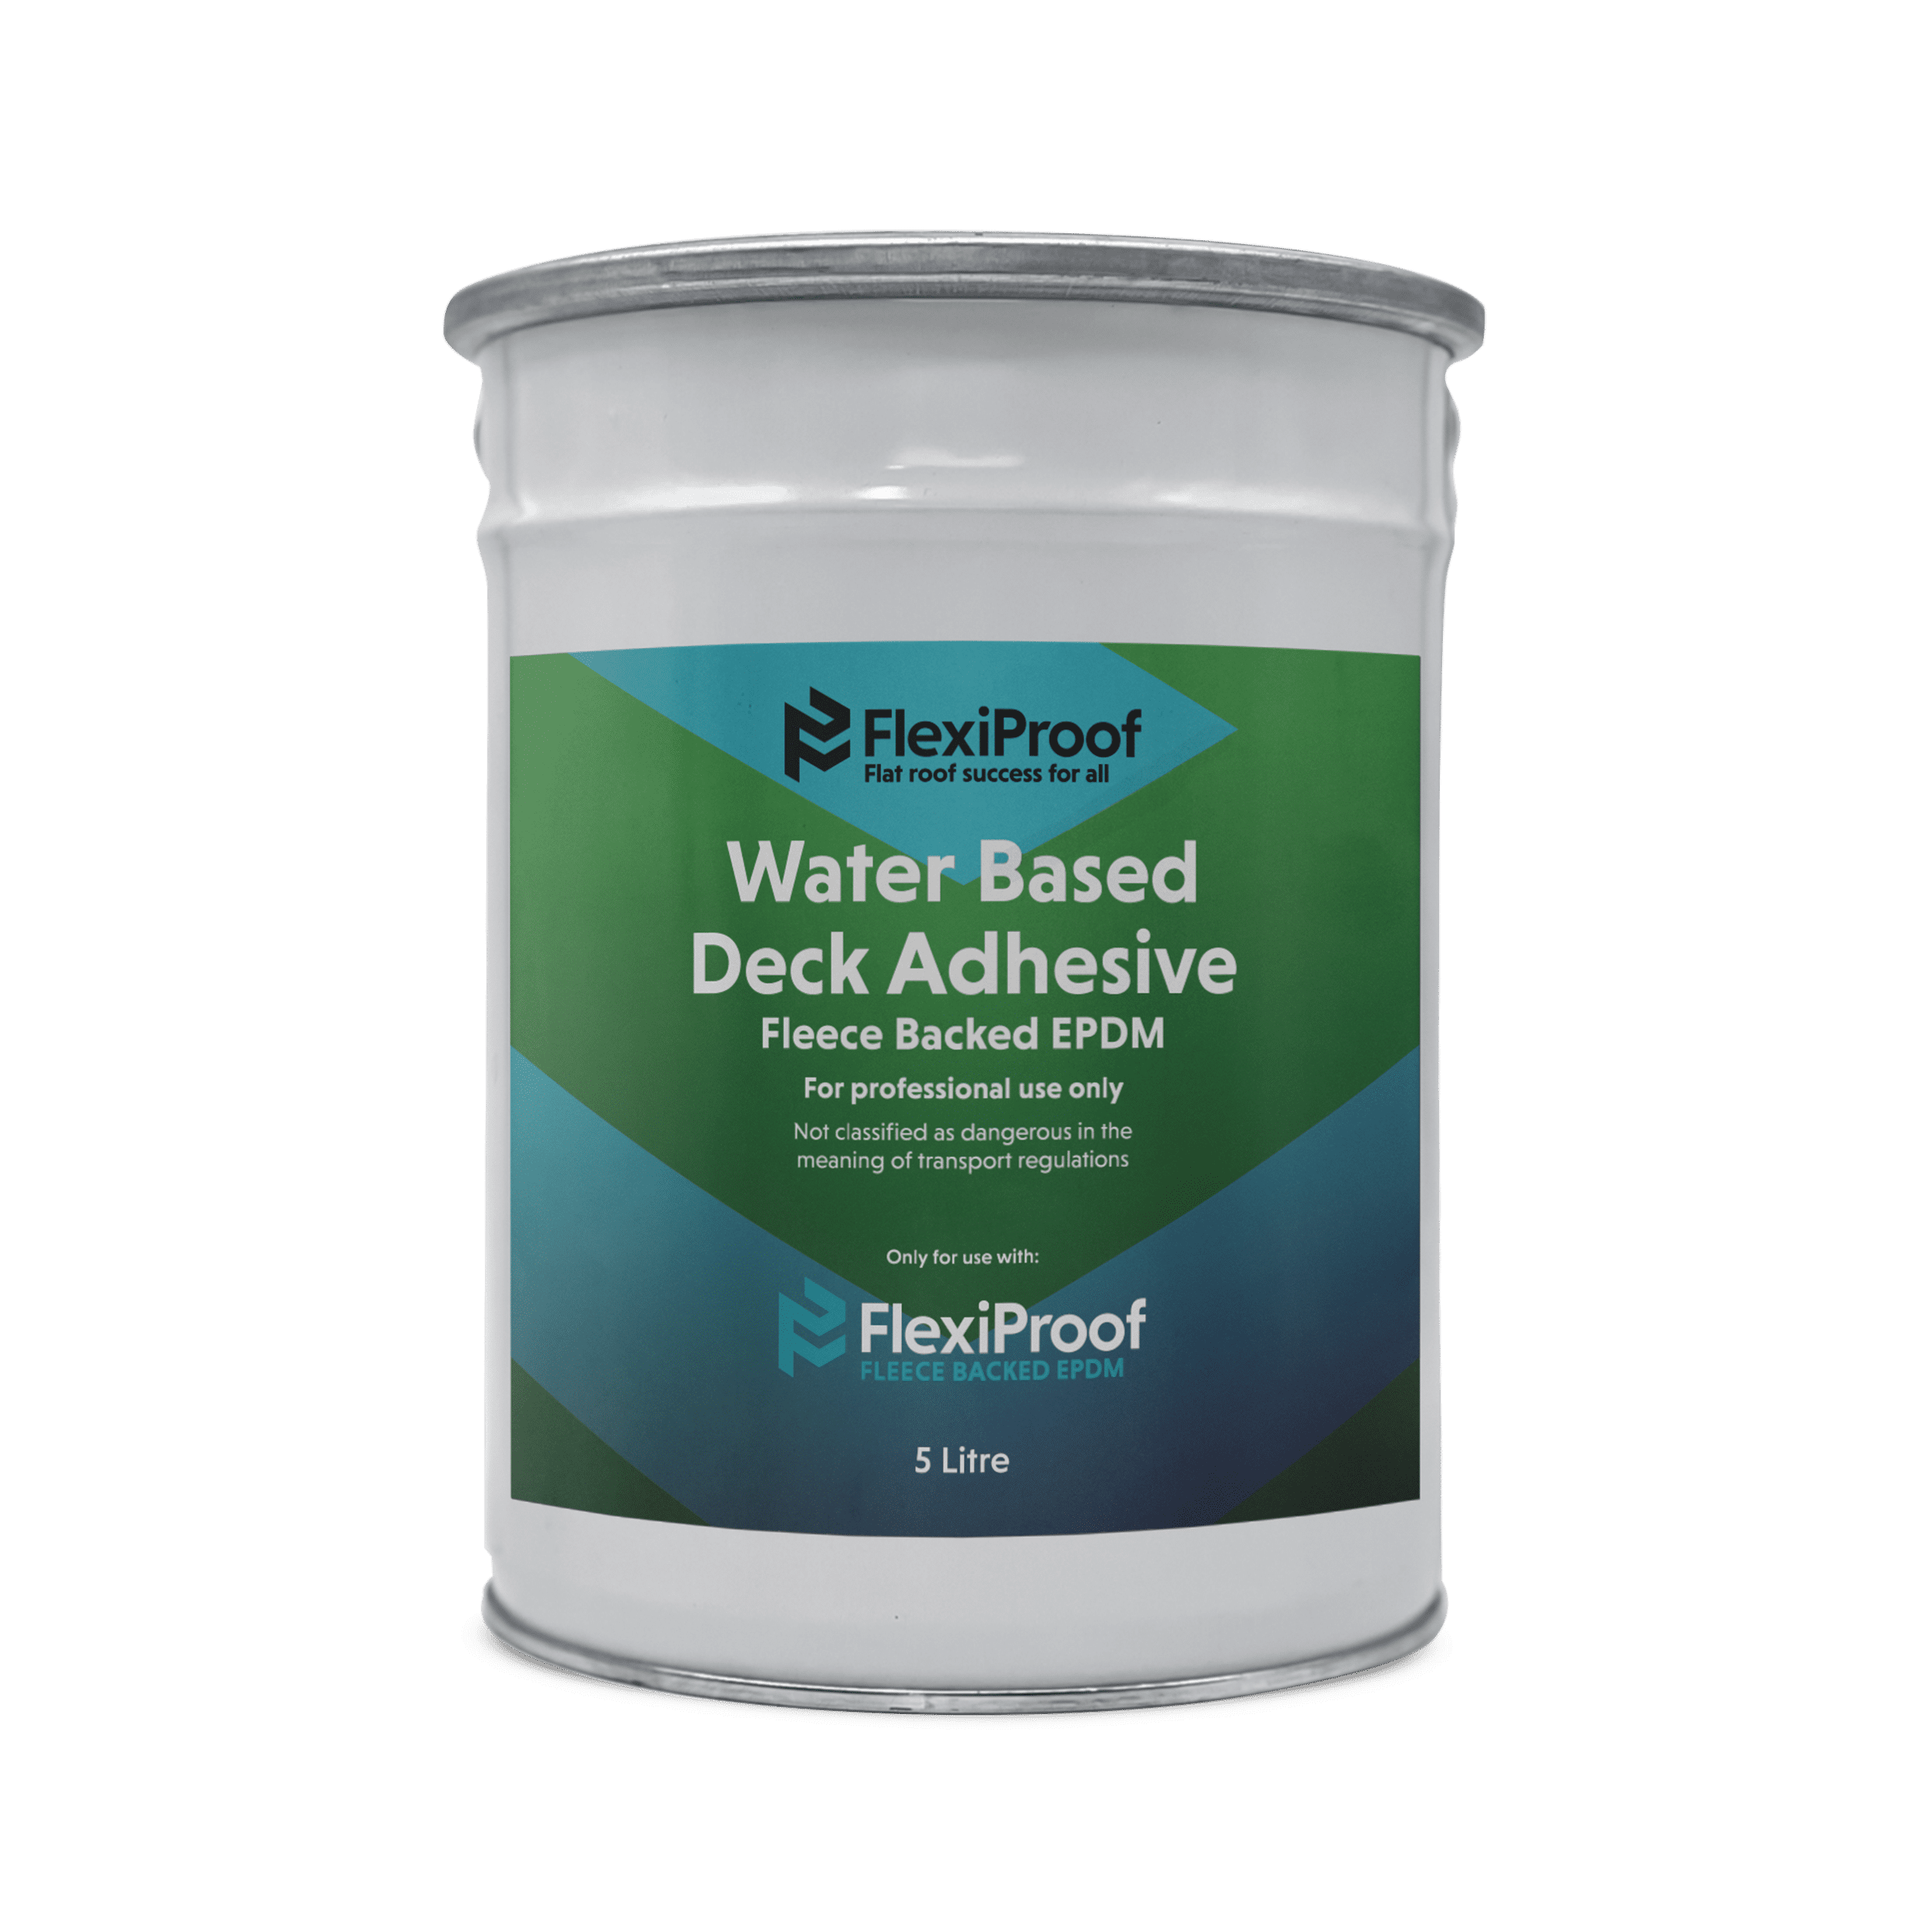 5l water based deck adhesive fleece backed